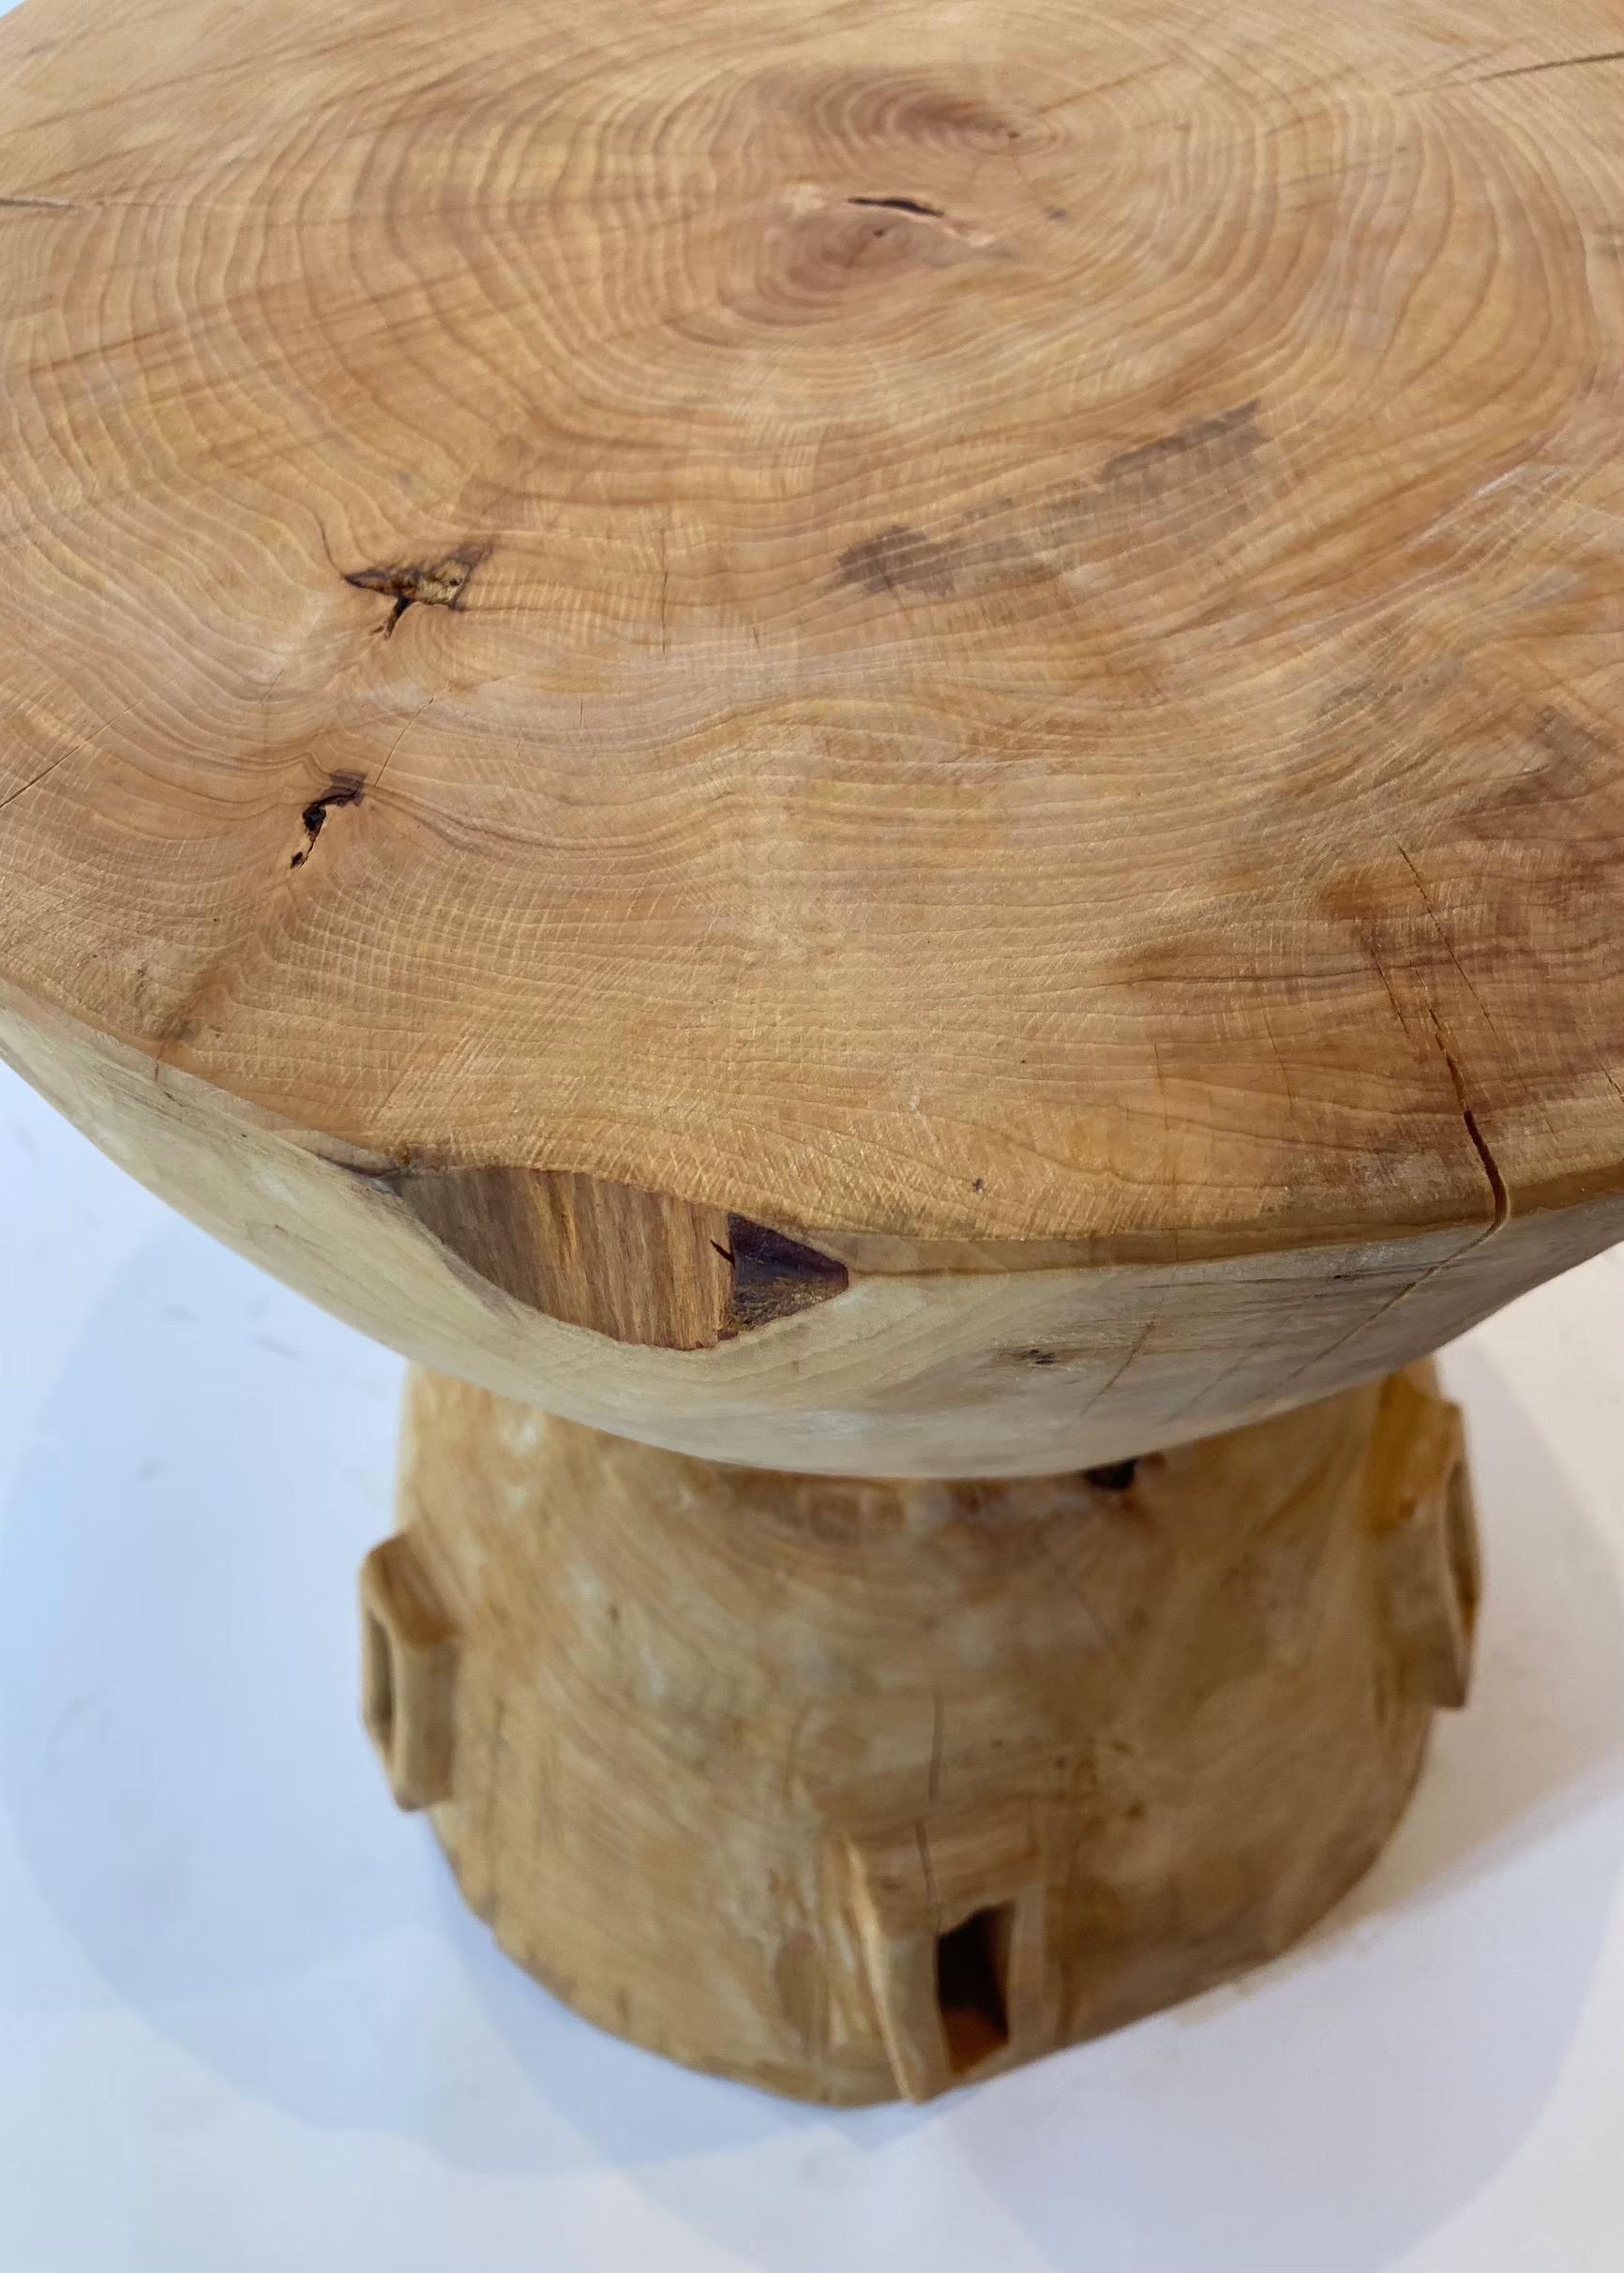 Name: Spaceship
Sculptural stool by Hiroyuki Nishimura and zone carved furniture
Material: Chinese black pine
This work is carved from log with some kinds of chainsaws.
Most of wood used for Nishimura's works are unable to use anything, these woods